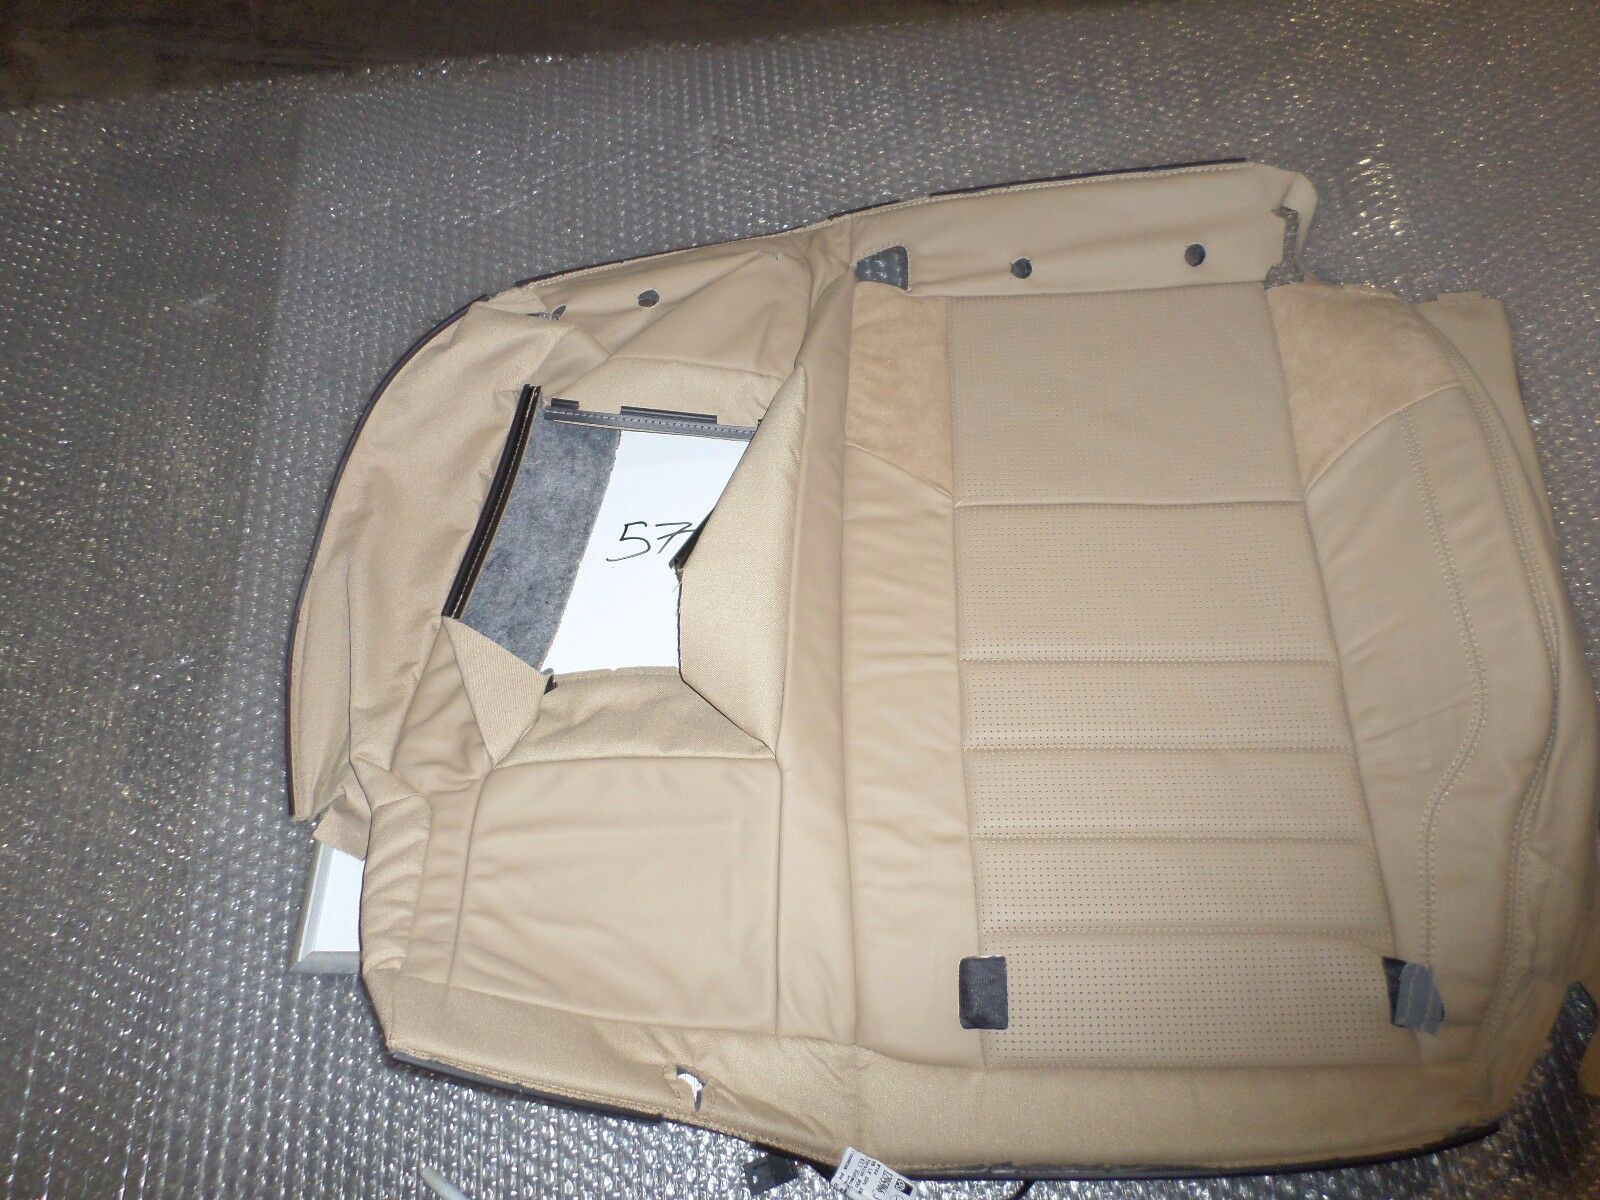 Primary image for NEW OEM LEATHER SEAT COVER MERCEDES ML-CLASS 2006-2011 REAR TAN 16492005338K62